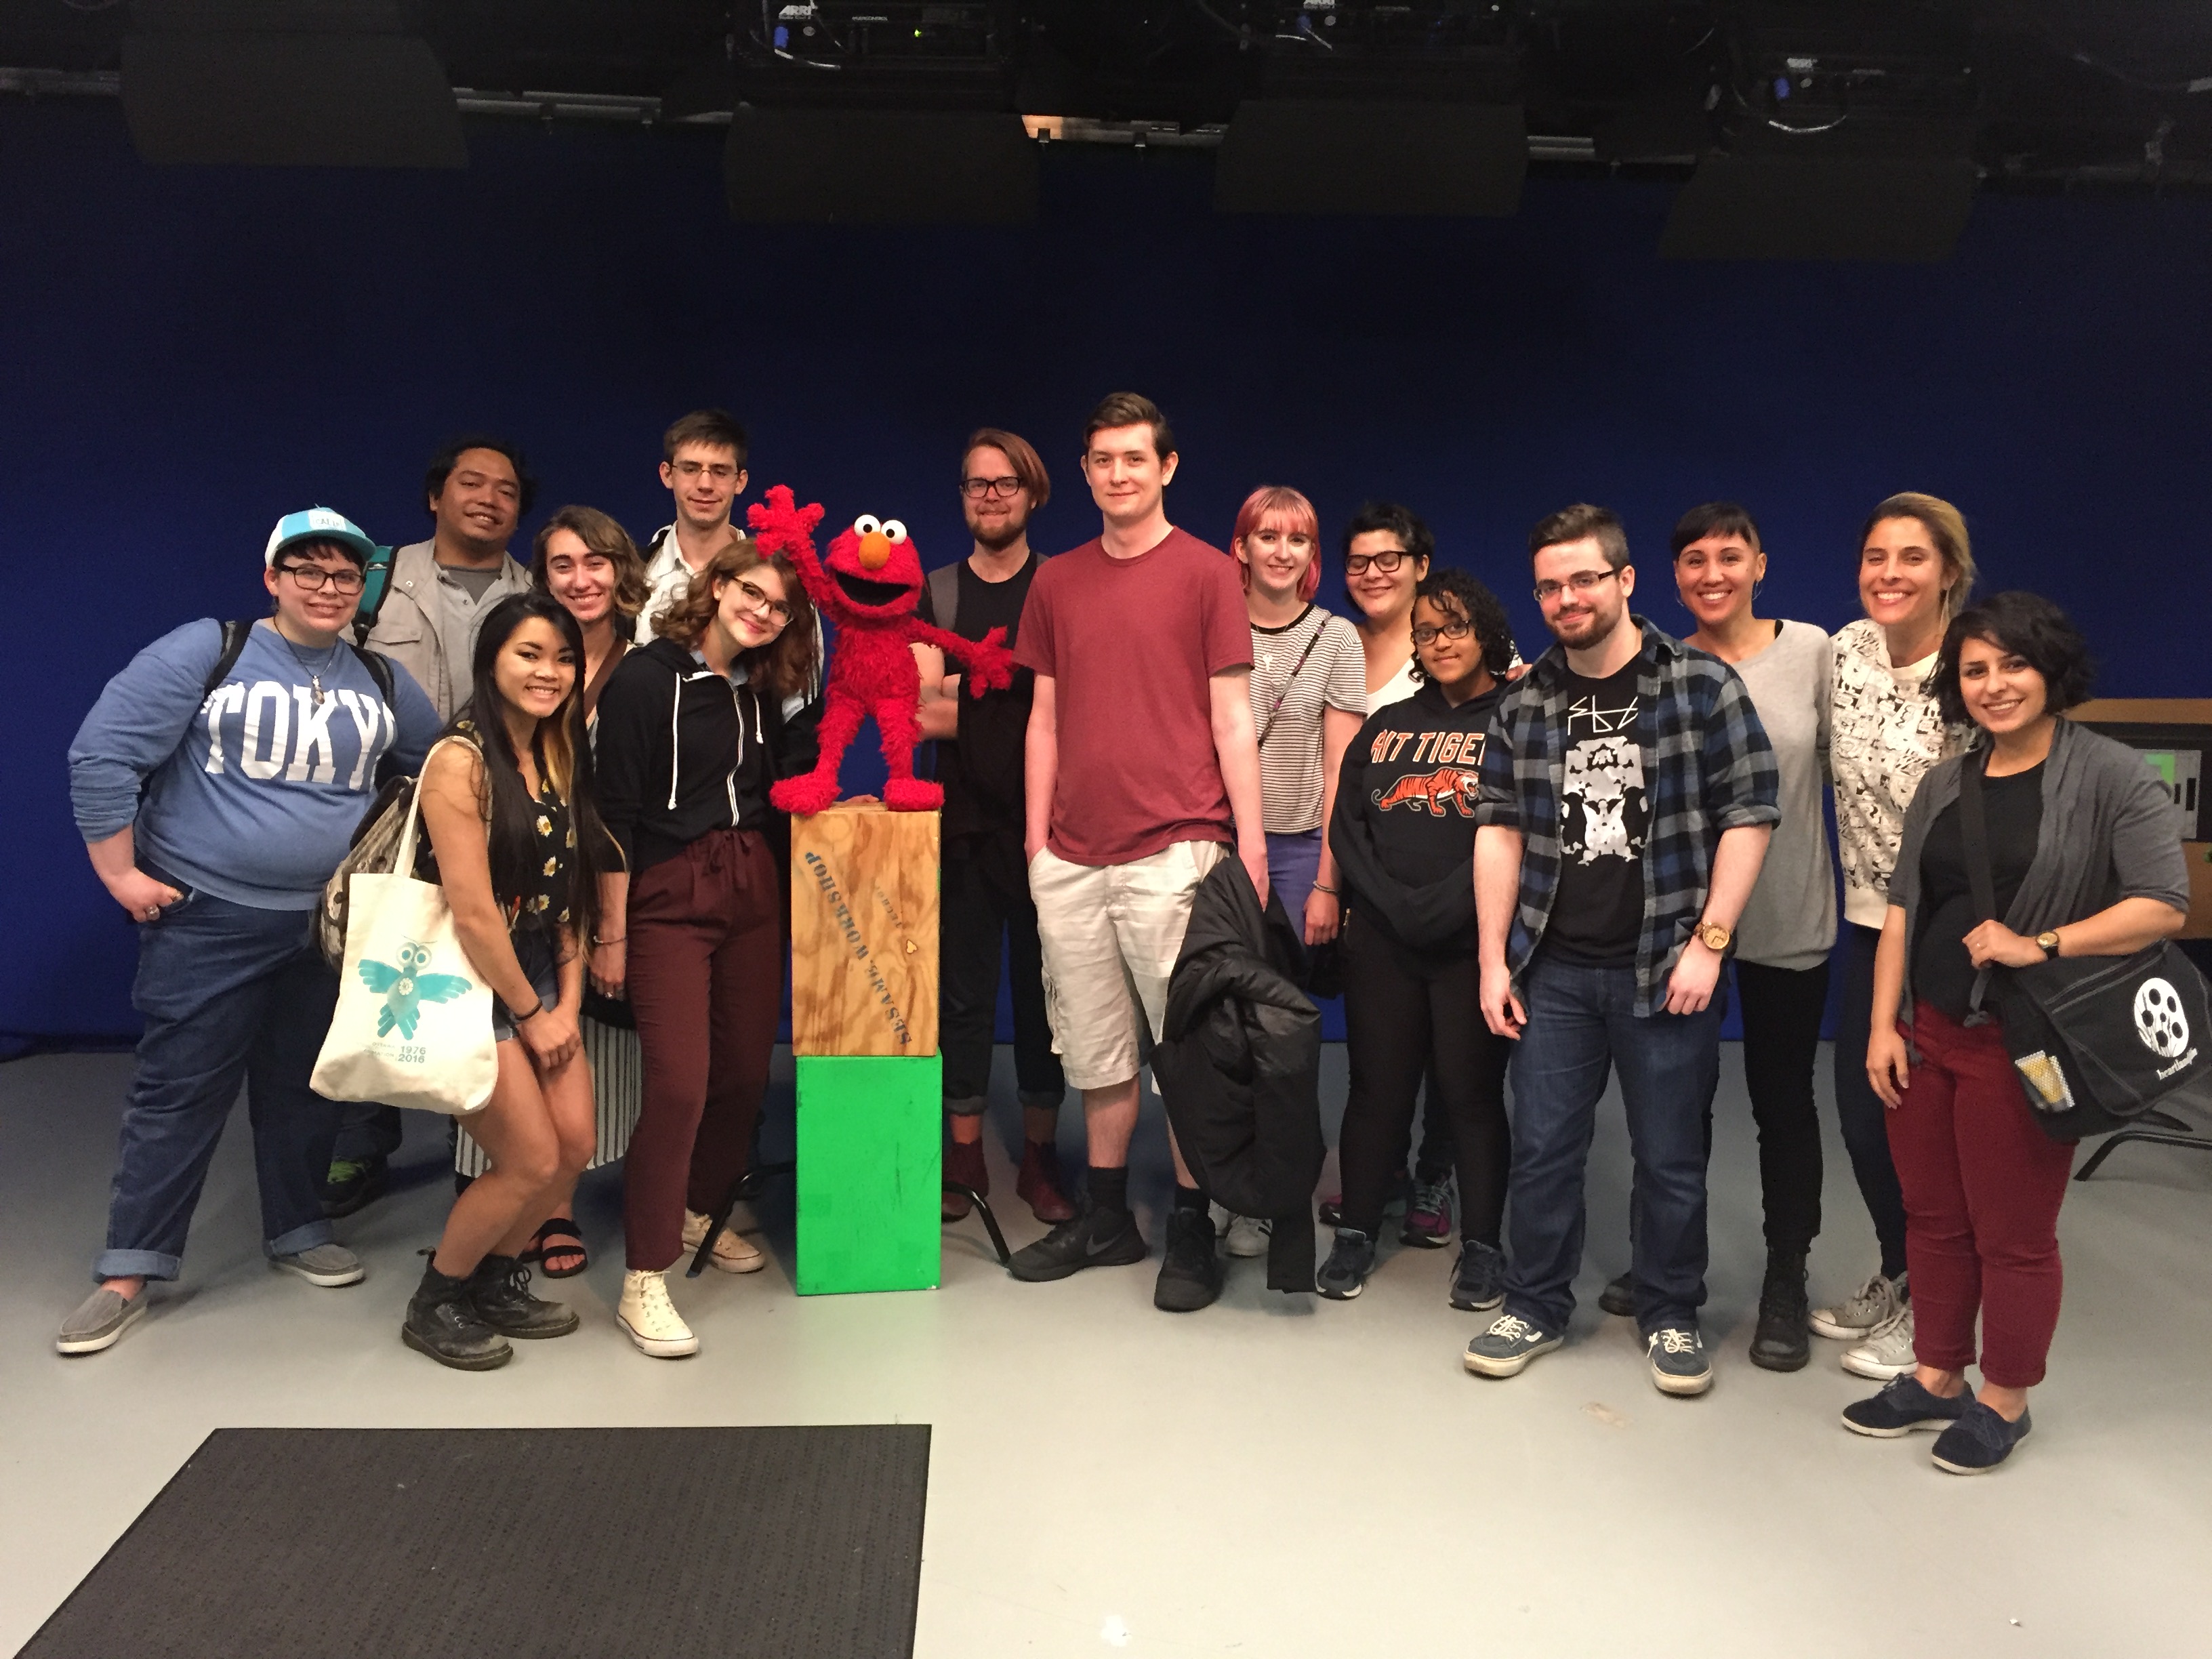 A group of SOFA students taking picture in an studio with Elmo from Sesame Street.